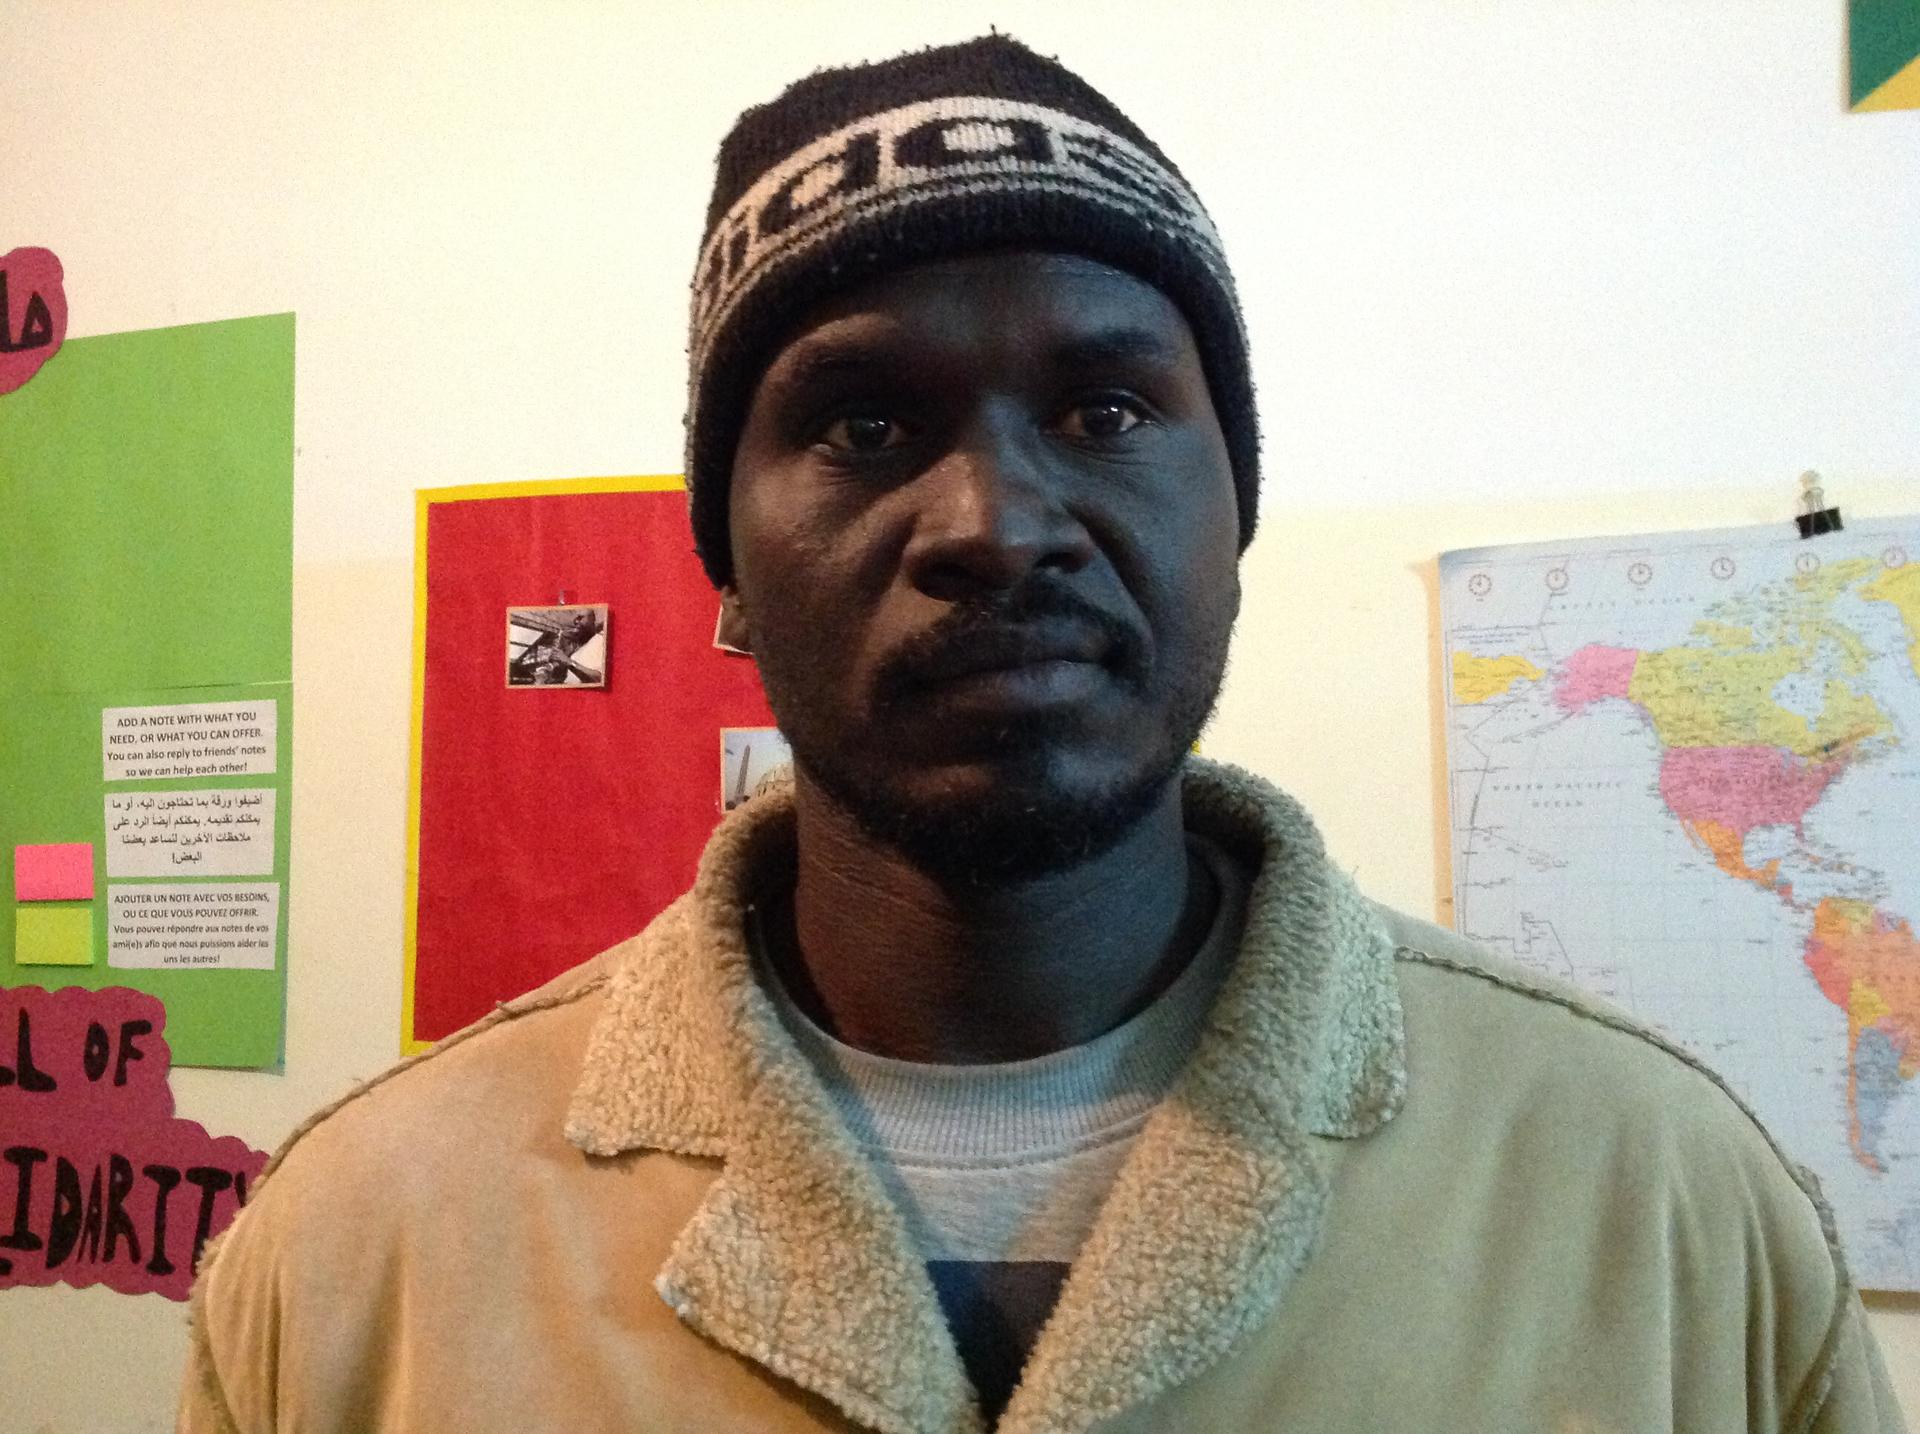 Hashim Musah says he was turned down for refugee status because the UNHCR said he could return safely to his part of Sudan.